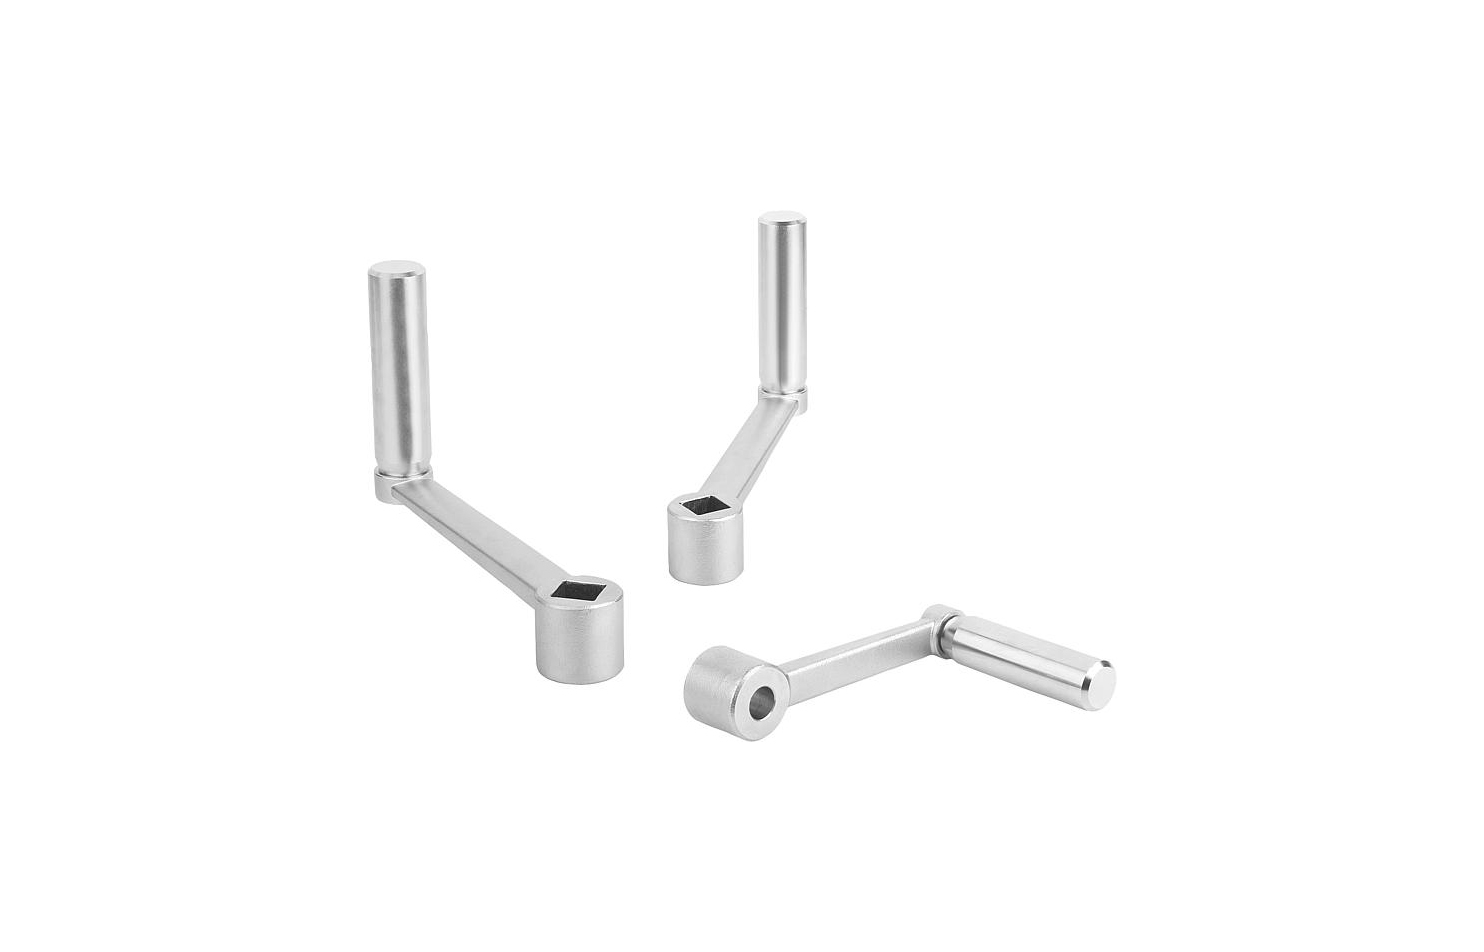 K0999 Crank handles stainless steel with revolving grip